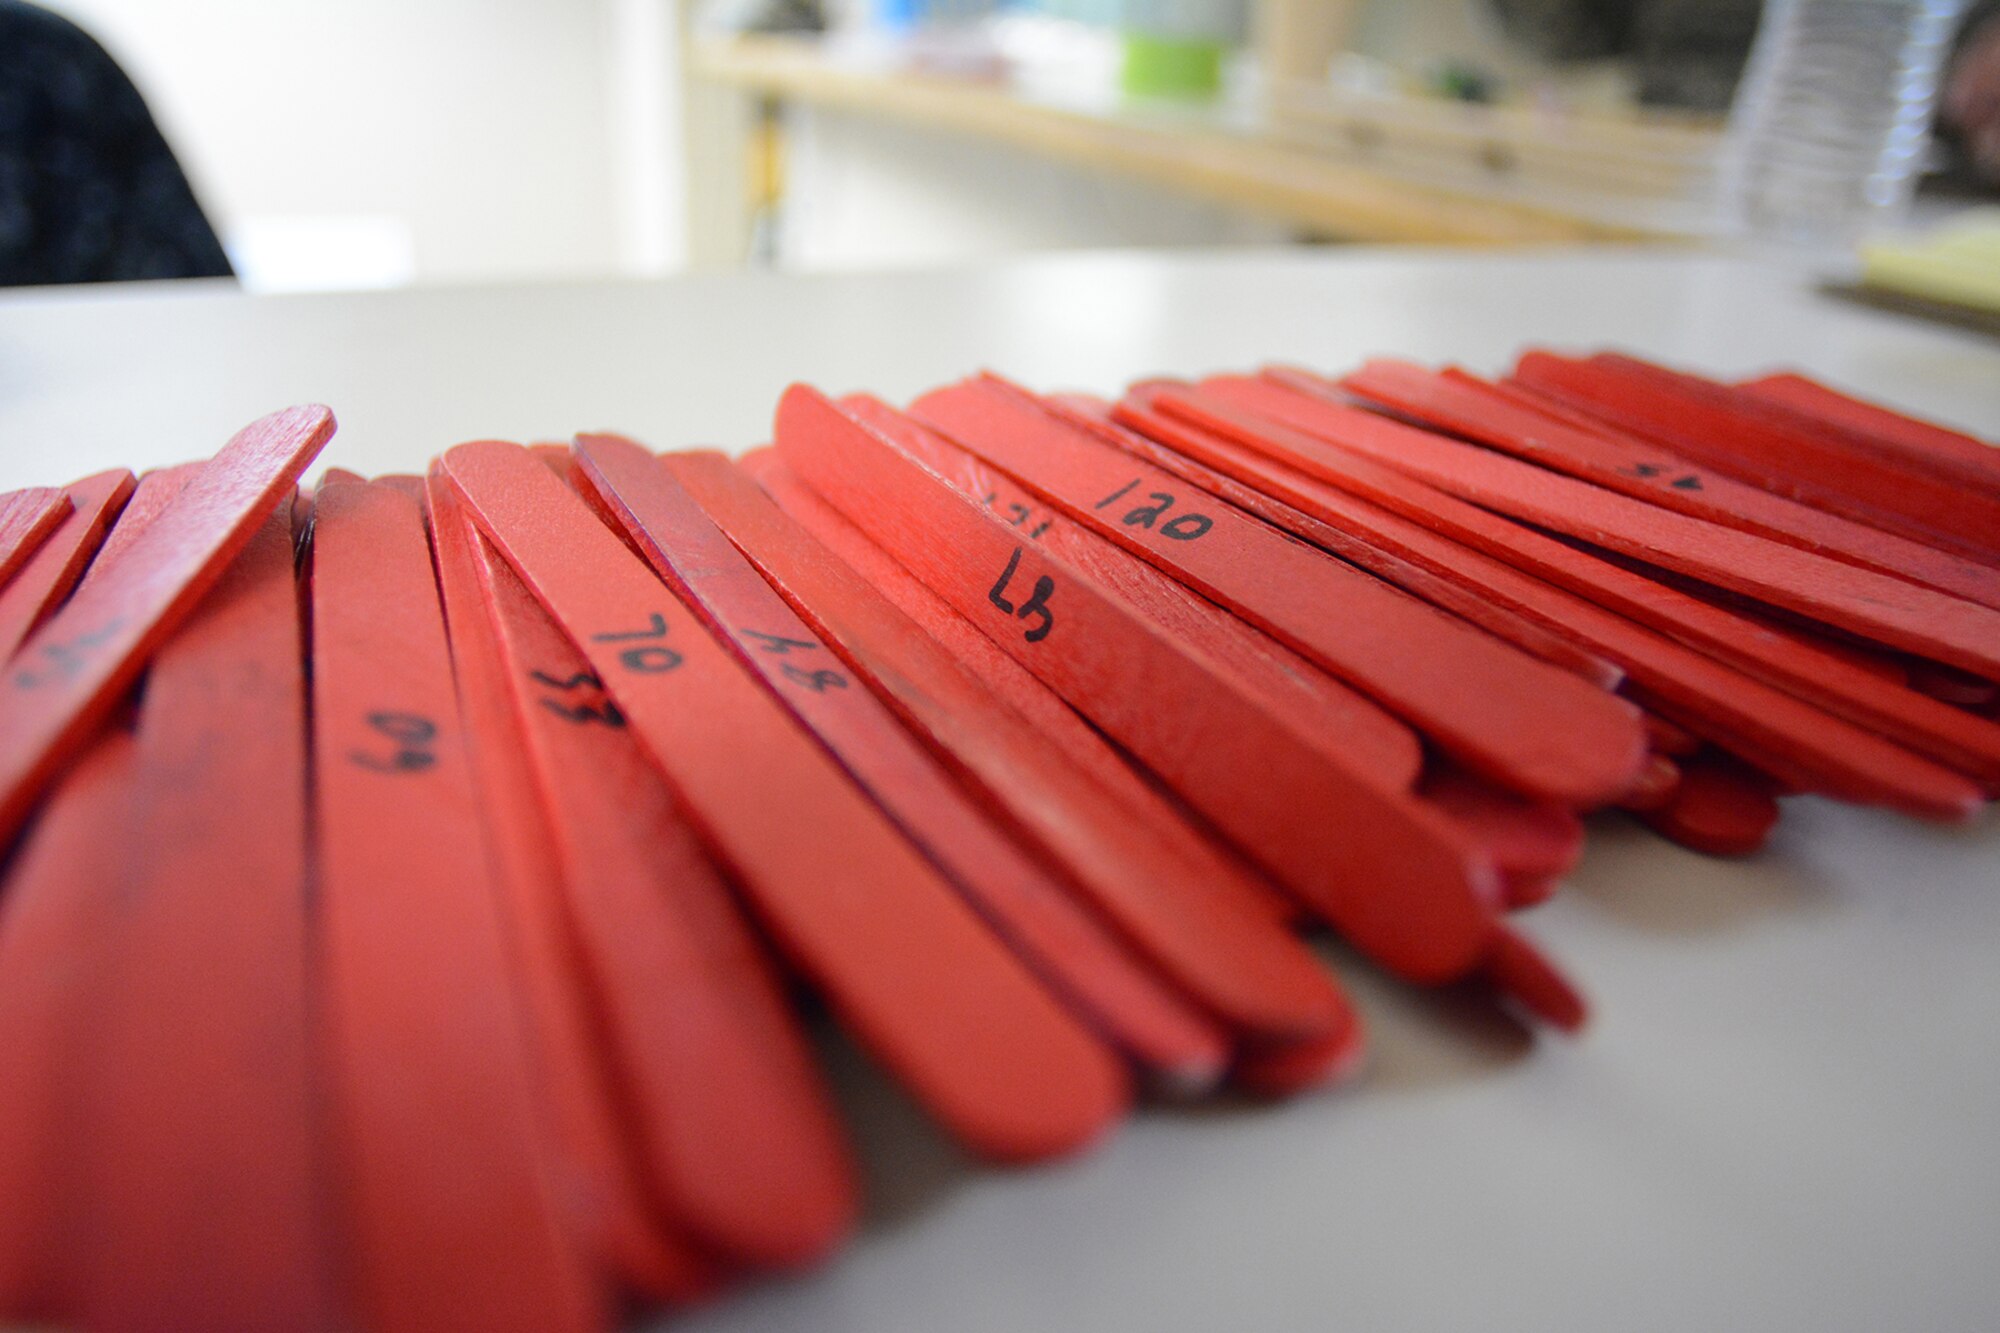 Red, numbered craft sticks are found on the front counter of the Heritage Manor building during Cajun Care 2014 in Abbeville, La., March 2, 2014. The sticks were handed out to patients to identify the treatment they wanted. The red sticks were used for medical appointments, blue sticks were used for dental appointments, and white sticks were used for optometry appointments. After the eighth day of the 10-day mission, Air National Guard, Navy and Army personnel had already given out colored popsicle sticks to more than 2,100 people, saving them more than $175,000 in medical services. (Air National Guard photo by Senior Airman Andrea F. Liechti)